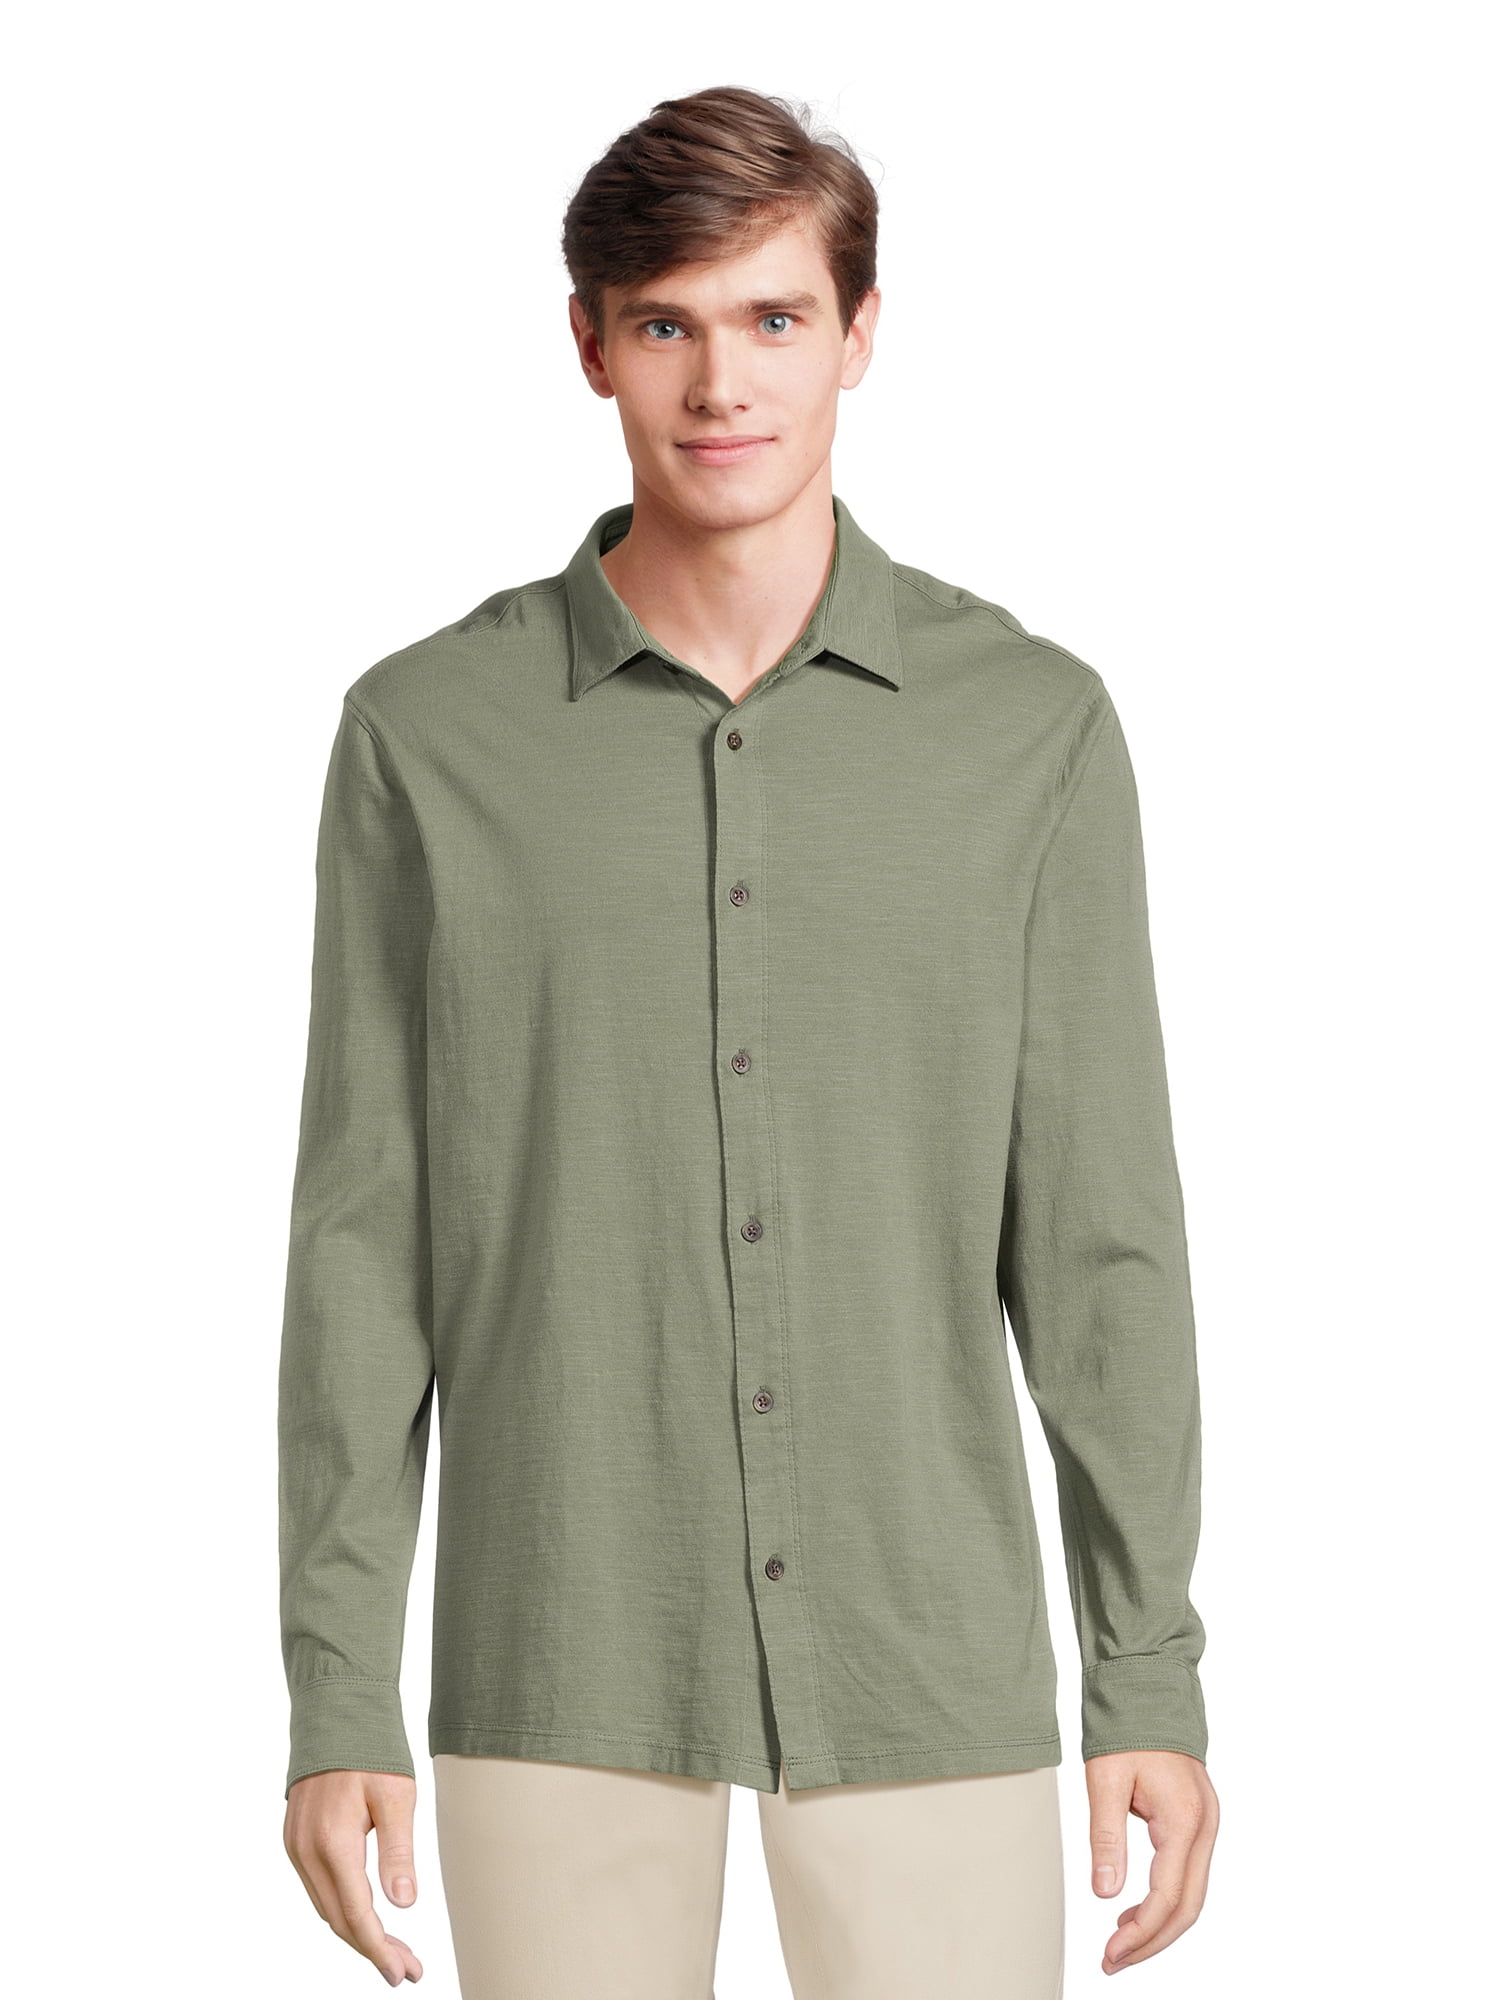 George Men’s Knit Button Down Shirt with Long Sleeves, Sizes S-3XL ...